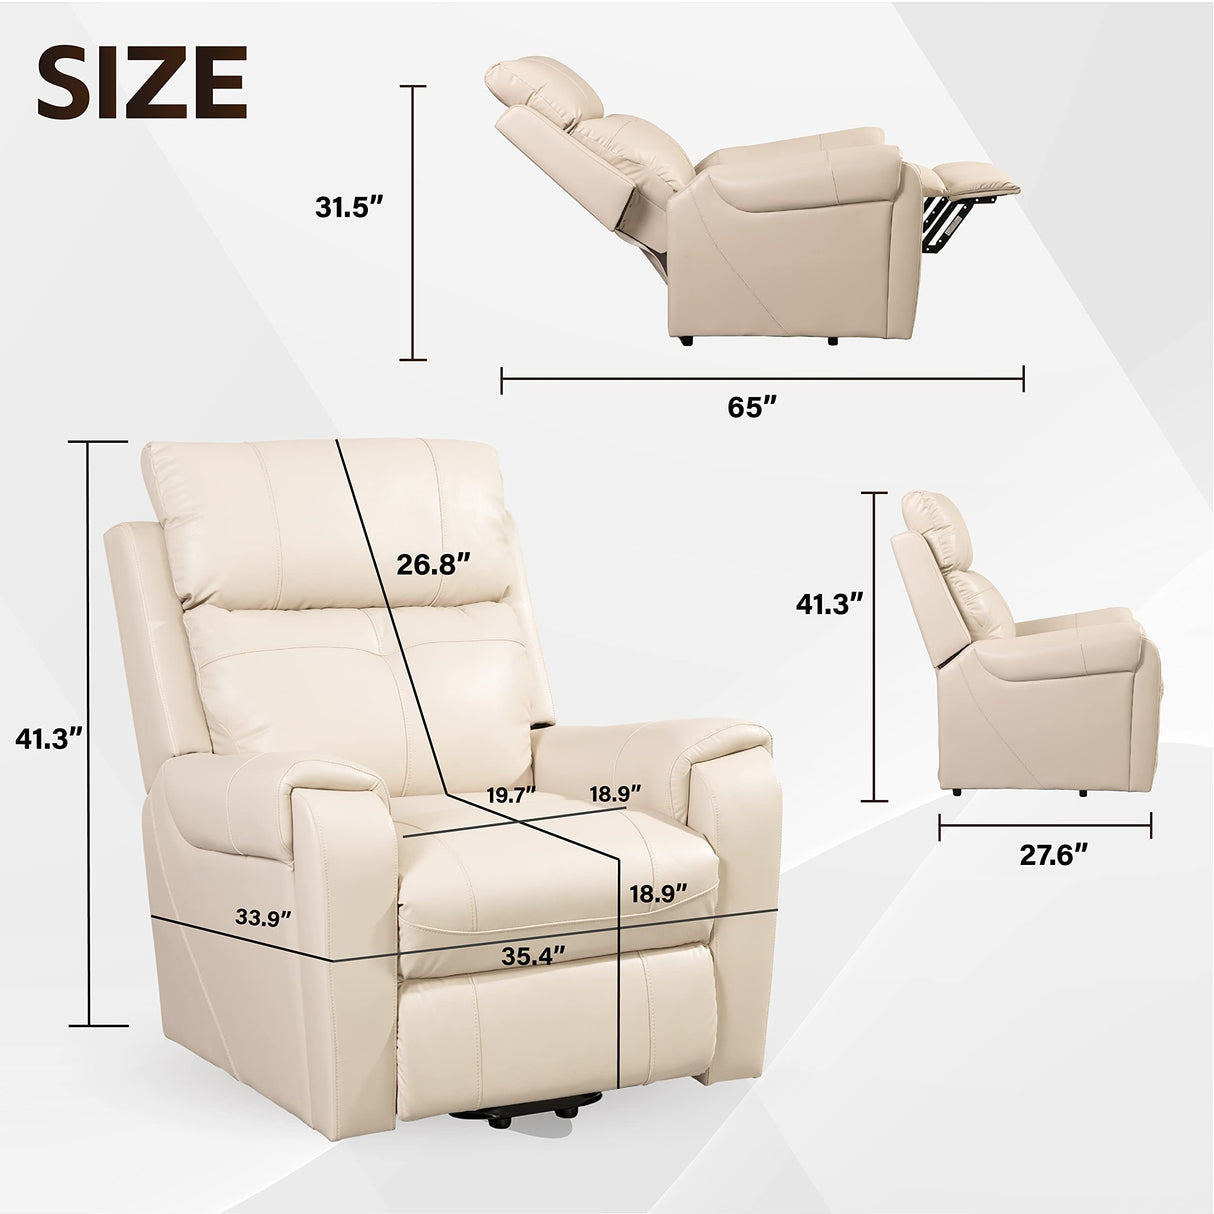 Lehboson Lift Chair Recliners, Electric Power Recliner Chair Sofa for Elderly, massage and heating(Common, Beige) Home Elegance USA